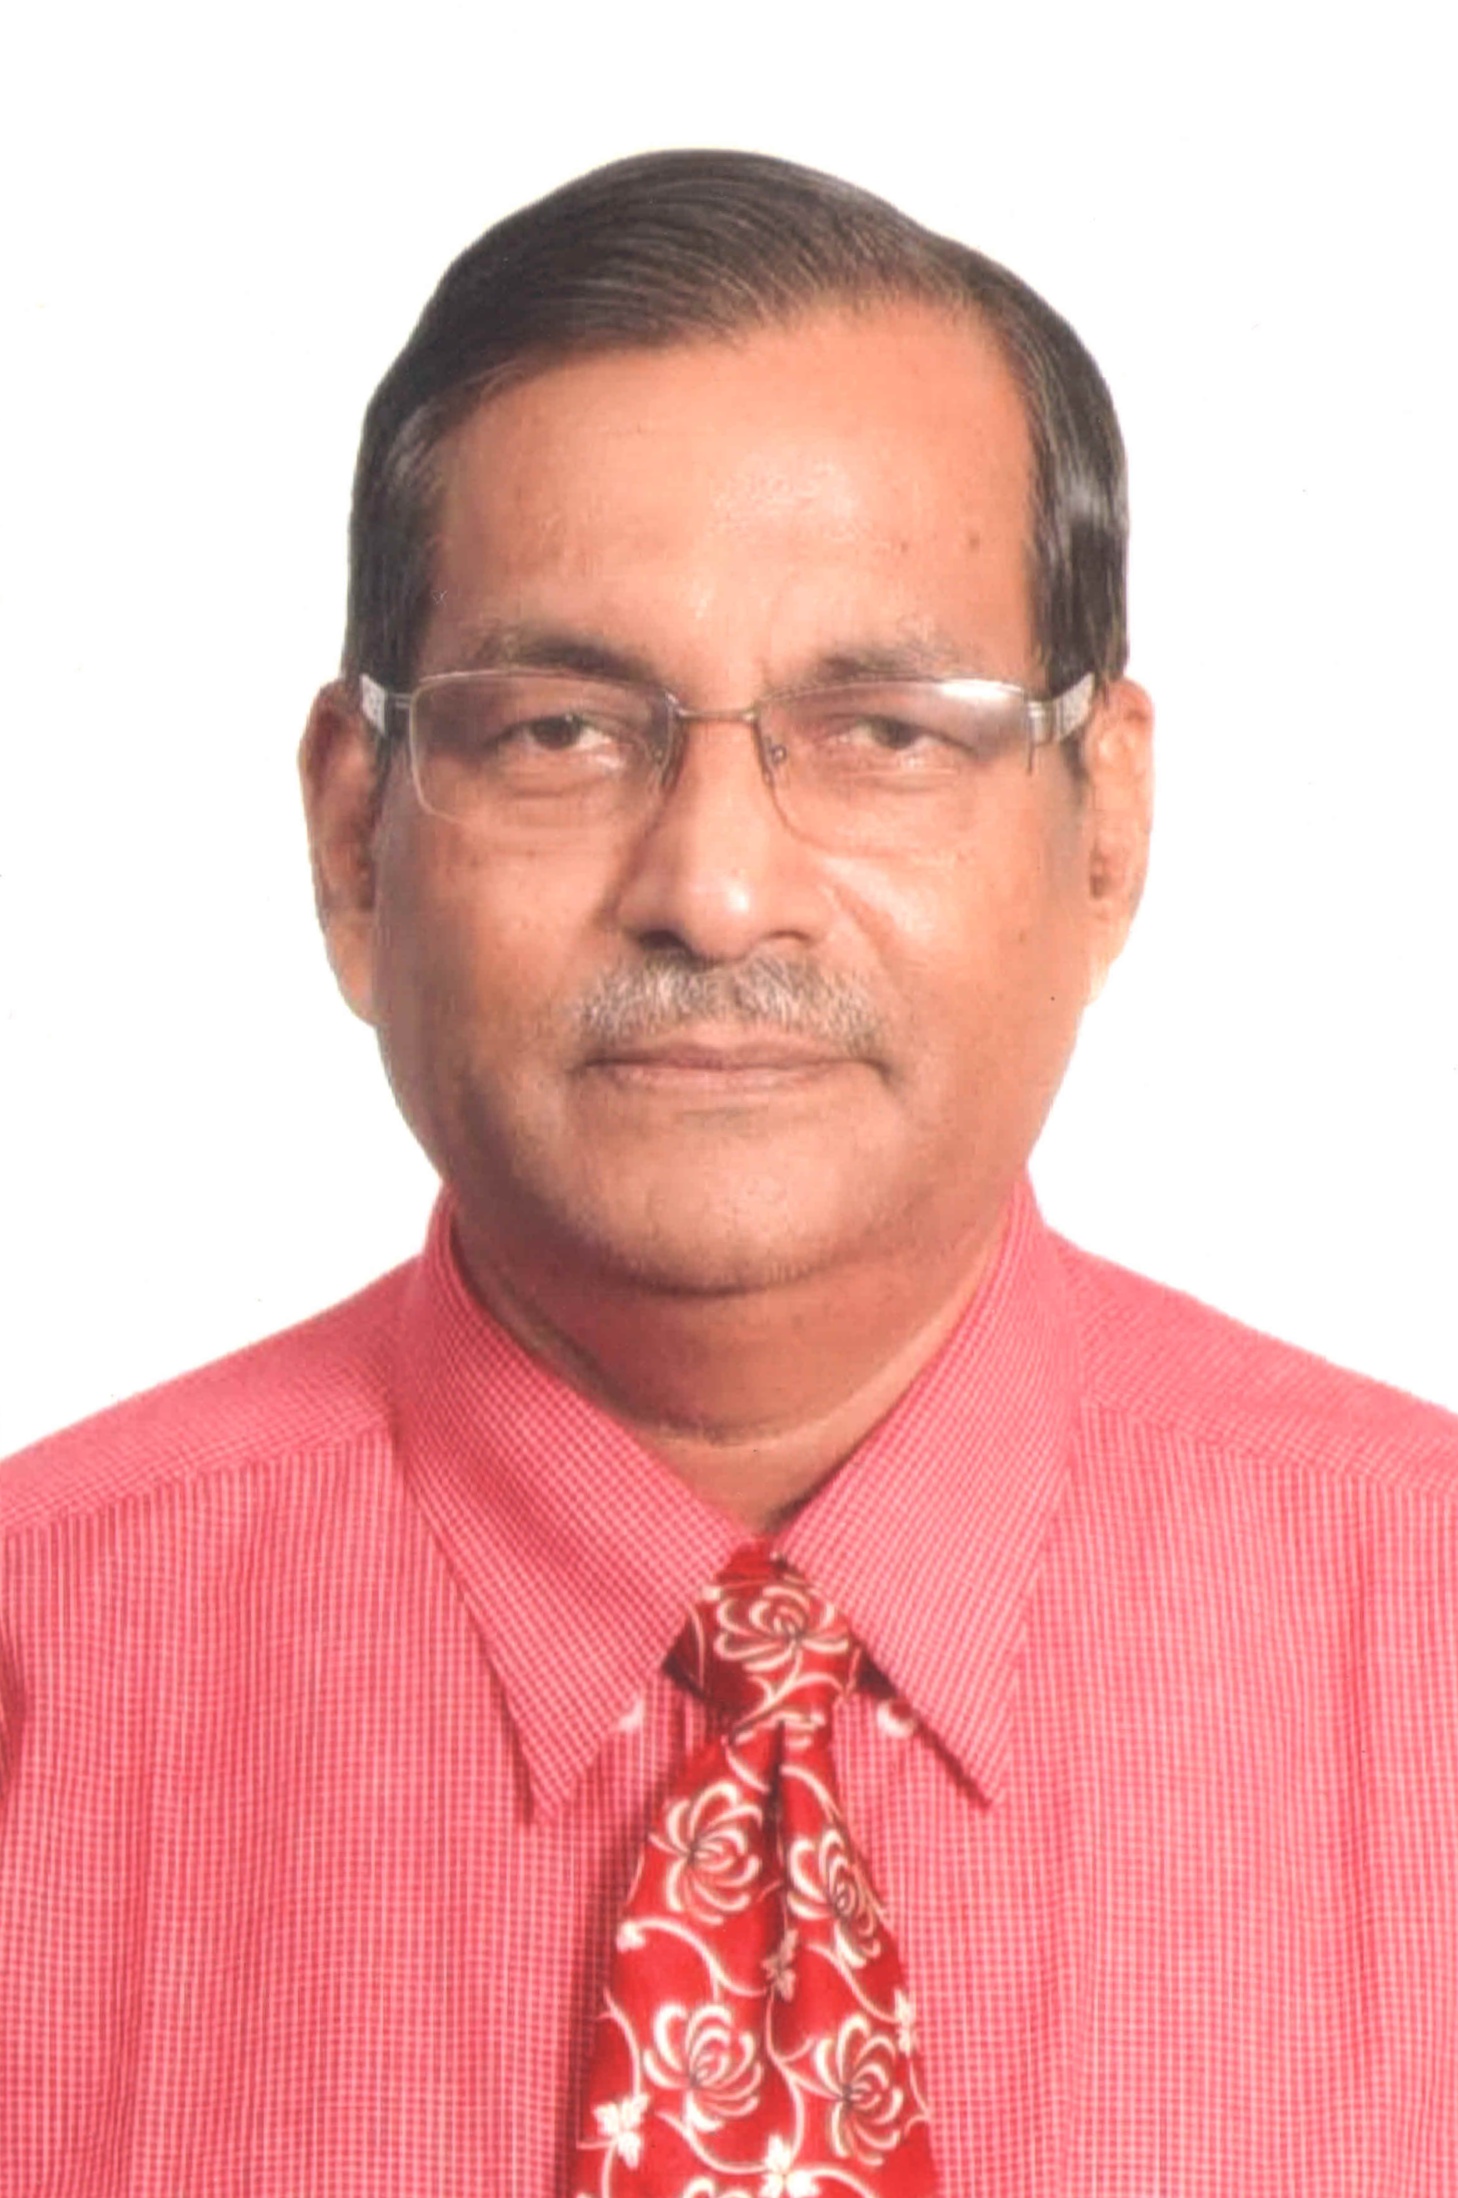 Prof. Dr. Jayant K. Routray (DOB: 11 November 1956): He holds a Bachelor of Science Degree with Geography Honours and Distinction, specialization in Climatology (1974) from Ravenshaw College, Master of Science in Geography with specialization in Town and Country Planning (1976) from Utkal University, Master of Regional Planning (1979) from Indian Institute of Technology, Kharagpur,  Post-Graduate Certificate in Town and Regional Planning, Technical University of SZCZECIN, Poland (1983); and Ph. D. Degree in Science (Geography) in 1987 from Utkal University, Bhubaneswar, India. He is a registered Town & Regional Planner and Fellow of the Institute of Town Planners (India), Fellow of the Royal Geographical Society (Institute of British Geographers), London; Life Member of many academic and professional societies including the Society of International Development (SID).   His  academic and research interests are in Decentralized participatory planning and sustainable rural development, Regional planning methods and techniques, Rural-urban relations, Social and development impact assessment, Disaster risk assessment, reduction and management, and Climate  induced adaptation. Academically and professionally, he has achieved the international status for his outstanding and diversified contributions in the field of Rural-Regional Development and Disaster Management. His teaching, research, training, consulting and community service experiences span over 40 years First 10 years in India and 30 years in AIT, Bangkok).   He started his career at the National Institute of Rural Development as Assistant Director of Integrated Area Planning for abour one year (1979-80). He served the PG Department of Geography as Lecturer and Reader from 1980 to 1999 with a few years of lien to work at AIT, Bangkok.   Prof. Dr. Jayant K Routray is currently holding the position of Professor Emeritus (Regional Development and Disaster Management) at AIT since May 2019. Ex-Chairman of the Institute of Town Planners India, Odisha Regional Chapter, Bhubaneswar; and currently serving as the Governing Board Member of the Nabakrushna Choudhury Center of Development Studies, Bhubaneswar. Prior to this, he was working in AIT for about three decades since June 1988 in various academic positions (Adjunct Professor, Professor, Associate Professor, and Assistant Professor). Served as a Faculty of the joint academic program of SPRING-Asia (Spatial Planning in Regions of Growing Economies) of AIT, Bangkok and Technical University Dortmund (Public University), Germany supported by the DAAD from 1989 to 1996 while continuing as a faculty at   In administration, at AIT he served as the Coordinator of the Interdisciplinary Academic Programs - Disaster Preparedness, Mitigation and Management (DPMM) & Climate Change and Sustainable Development (CCSD); Coordinator of Regional and Rural Development Planning; and  Coordinator of the Asia Pacific Initiative video conferencing course (international and interuniversity academic program) on “Disaster Management and Humanitarian Assistance (DMHA)” in collaboration with the University of Hawaii at Manao, USA and United Nations University, Tokyo, Japan from 2007 to 2017.    He also served as elected Academic Senate Chair of AIT from 1 June 2012 to 31 May 2014 and elected Faculty Representative from 1 Nov 2007 to 30 March 2010, Director of the ASEAN Regional Center of Excellence on Millennium Development Goals (ARCMDG) from 2008 to 2010. In the capacity of the Faculty Representative and Academic Senate Chair, he served the AIT Board of Trustees as an ex-officio member for two terms.   He has gathered about 40 years of teaching, research and professional experience. He has served as external examiner of many doctoral theses of Indian universities. He has 192 publications (31 research monographs/books, manual and proceedings, and 29 book chapters, 31 research papers in national and regional journals, and 70 papers in international refereed journals, and other publications). The total citations of his research work so far 2696 with h index = 28 (Google Scholar database) and h index = 22 (Scopus database). He has supervised 33 Doctoral candidates (32 Ph. D., one D. Sc. Degree), 6 M. Phil. and 146 Master Theses and Research Studies, and 8 Special Studies. He is currently Editorial Board Members of Asia-Pacific Journal of Rural Development (APJORD), and International Journal of Built Environment, Journal of Environmental Management of the National Institute of Development Administration (NIDA) of Thailand, and Journal of Geography and Social Sciences of the Department of Geography and Regional Planning, University of Baluchistan, Pakistan.   As a faculty and coordinator of three academic programs, he was instrumental in developing and implementing 18 MOUs and MOAs with universities, Institutions and international organizations (Royal University of Bhutan, WWF, Miyagi University, SGES of Kyoto University, Kyoto University, Telecom Sans Frontiers, PHI Sudan, UNISDR ONEA-GETI, HEC Pakistan, RIMES, NTNU Norway, NUST Pakistan, ADPC, and ADPC & ETH Zuric). During 1994 to 2017, mobilized 28 projects (research, training, international workshops, forum and expert consultation meetings) amounting to more than 1.25 million US Dollar. He was involved in preparing and signing a number of MOUs with universities and institutions and international organizations having mutual interest in Regional Development Planning, Disaster Risk Reduction and Climate Change.  He is the reviewer of research articles of various international peer reviewed journals (Regional Development Dialogue, Natural Resource Forum, Land Use Policy, Journal of Environmental Management, Current Anthropology, Asian Journal of Geoinformatics, Environmental Management, World Development, Australian Geographer, International Journal of Built Environment and Sustainability, Global Environmental Change, International Journal of Disaster Risk Science, Weather and Climate Extremes, International Journal of Disaster Risk Reduction, Climate Change, Natural Hazards, Environmental Hazards, APJORD, Planning Malaysia, and American Journal of Experimental Agriculture, Advances in Meteorology, and Gender and Women Studies, Land Degradation and Development, Cities, Journal of Race, Ethnicity & the City and others).  Reviewed book manuscript on disaster and climate change for Elsevier. Serving as a Member of the Editorial Advisory Group of a Publication Series on Disaster Risk Reduction by Springer since 2013. Reviewed the Monograph Series on Sustainable and Inclusive Transport (Enhancing Rural Transport Connectivity to Regional and International Networks in Asia and the Pacific), UN ESCAP, Bangkok, 2020.   To illustrate a few, he had served as a Panel Speaker in the International Geographical Union (IGU) Commission Special Symposium on “Changing face of the world retailing industry” at Nikkei Hall, Tokyo, September 1993. He served also as a Member of the Expert Committee on “Temperature rise in Bhubaneswar City”, held at Orissa Pollution Control Board on 31 March 1999, organized by the Environment Department, Government of Orissa, Bhubaneswar, India. He served as Resource Person cum Facilitator of the World Bank Institute Training Course through video conferencing at AIT in 2003 and Panel Speaker for the Distant Digital Education Workshop at Keio University, Japan in 2004, delivered a series of professional lectures in many institutions and universities in India, Japan, Germany, Norway, Malyasia, Bangladesh and Thailand. He has developed and conducted a number of international training programs at AIT while serving as resource person in those training programs, delivered a number of keynote addresses in international conferences. Recently he represented AIT and ARCMDG, and served as Co-organizer and Track/Theme Coordinator of the International Conference on “Language, Education and Millennium Development Goals” organized jointly with UNESCO, Bangkok, Thailand in 2010. Delivered a number of keynote speeches in international conferences in India, Bangladesh and Malaysia. Organized the International Forum on Education for Rural Transformation (IFERT) at AIT in 2017.  As a consultant he has worked for the FAO (RAPA), Bangkok in 1986-87; UNCRD, Nagoya, Japan in 1991; and Mekong Secretariat of the UN-ESCAP, Bangkok in 1994 and UNDP, Nepal in 1997, and conducted one Regional Workshop for ILO in 1998, and UNEP training Program for SAARC countries in 2006, and UNIFEM Workshop and Training program in 2010. He served as a Panelist for the ProSPER.Net-Scopus Young Scientist Award 2011 in Sustainable Development, created in partnership with Elsevier, held at the University of Philippines, 13 July 2011. Provided advisory cum consulting services to National University of Laos in developing a new graduate level academic curriculum on Integrated Forest Resource Management with Rural Development in 2011. Delivered a keynote address on “Environment and Development: Issues and Challenges” in the international conference held at Department of Geography and Environment, Rajshahi University, Bangladesh during 7-8 March 2014. Served as a panel speaker on “Rural-Urban Relations; Challenges for Bridging the Rural-Urban Divide” in the International Conference on Urban and Regional Planning 2014 during 9-11 May 2014, held at Center for Innovative Planning and Development, Universiti Technologi Malaysia, Johor. In 2017, delivered special lectures in the Miyagi University of Education, Sendai, Japan; UNCRD, Nagoya, Japan; and Oxfam India, Bhubaneswar on topics related to disaster management, contemporary regional development planning and sustainable development. Recently contributed as a resource person in the Expert Group Meeting “Enhancing Rural Transport Connectivity to Regional and International Networks in Asia and the Pacific”, organized at Bangkok by the UNESCAP, 9-10 July 2019. Served as a keynote speaker of the IGU-India conference, March 2020. He also delivered a series of Webinars in 20, 21 & 22.